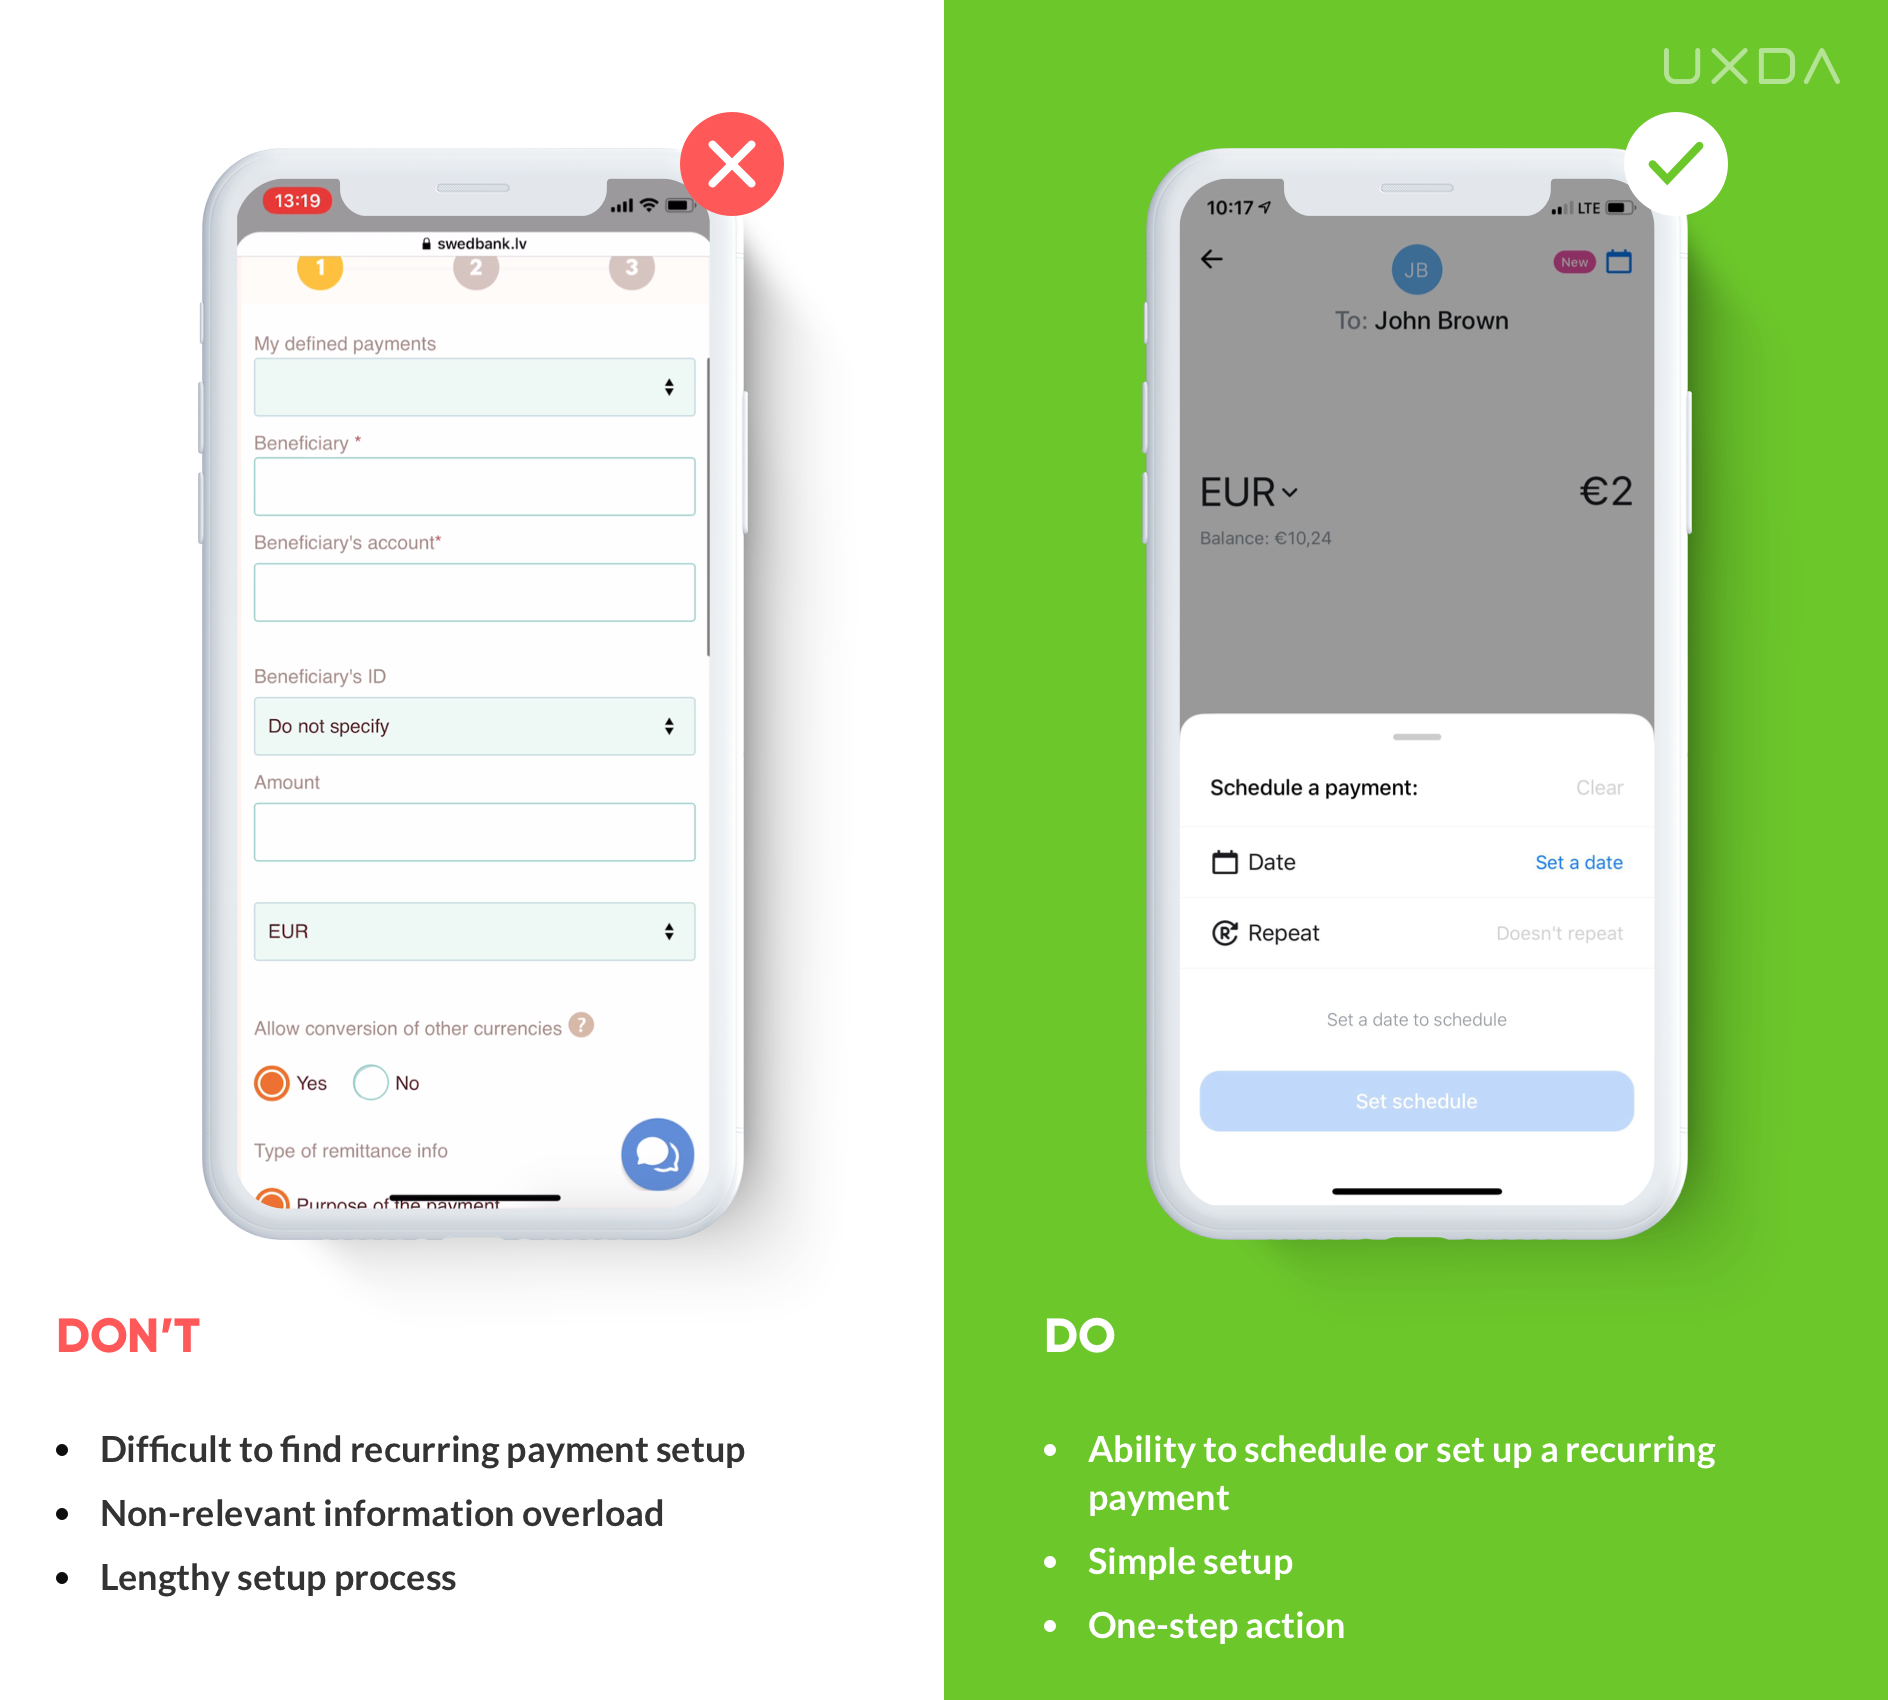 Fintech UX / UI Guide: TOP 20 Tips to Improve Mobile Banking Solutions Design - Recurring payments